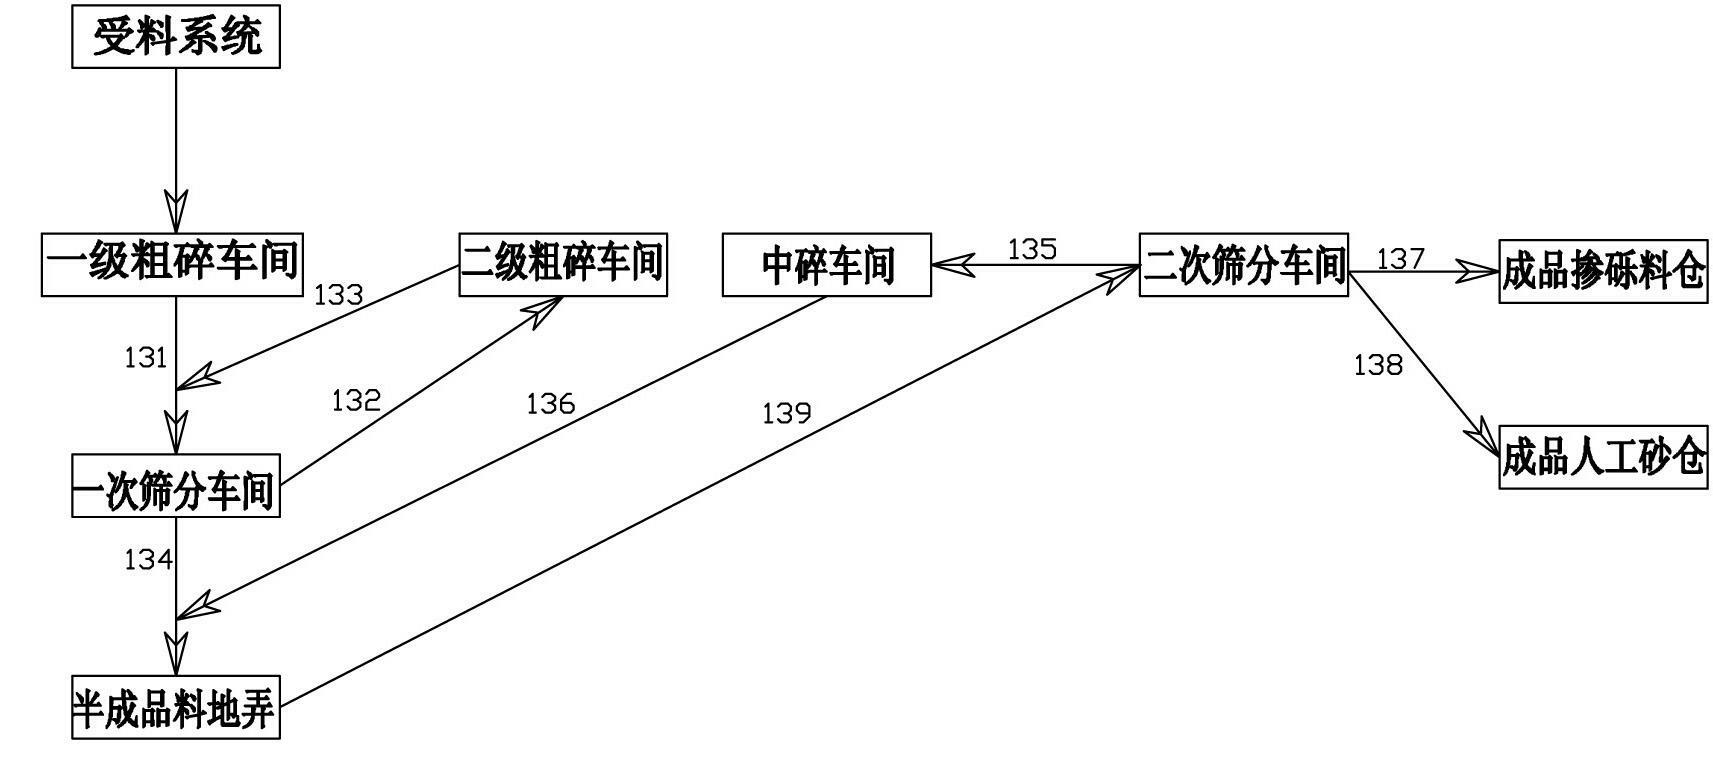 Gravel doped grinding system for anti-leakage wall and preparation method thereof